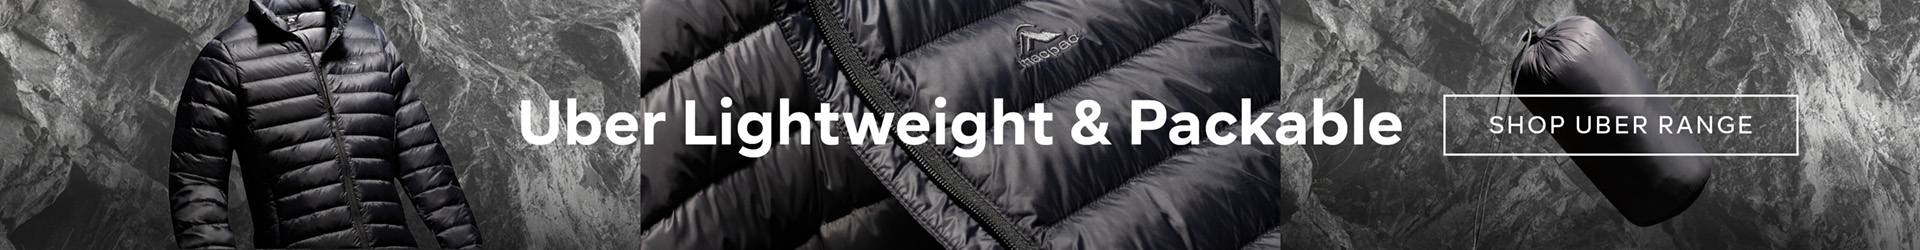 Uber Lightweight and packable - SHOP NOW